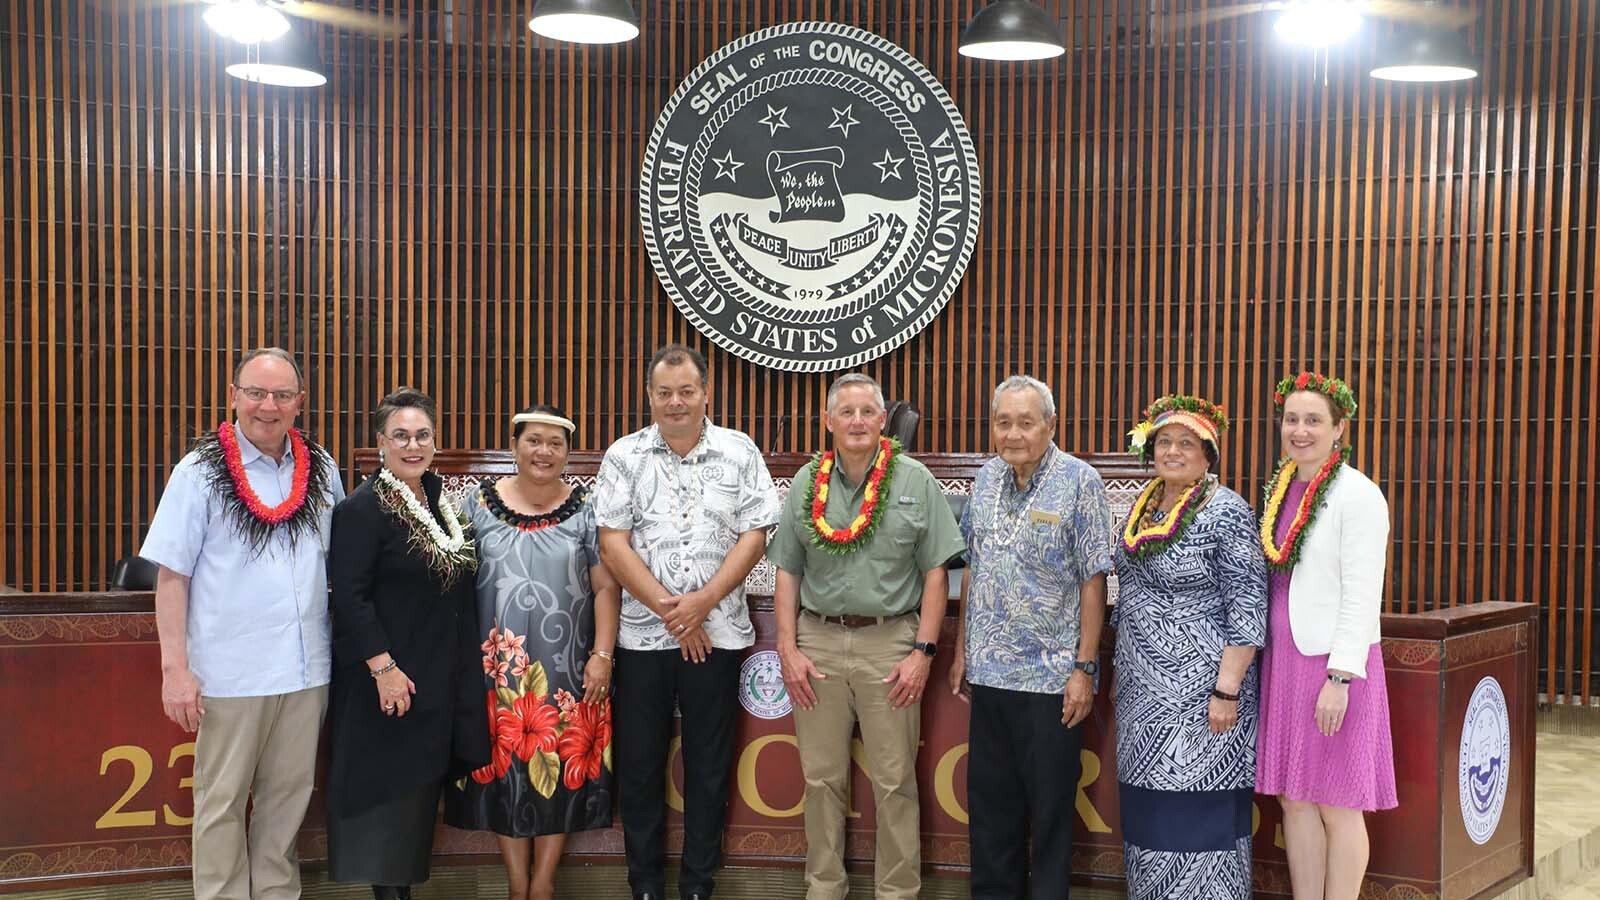 Harriet Hageman, second from left, is welcomed to Guam by local officials during a recent visit to the U.S. Pacific Island territory.